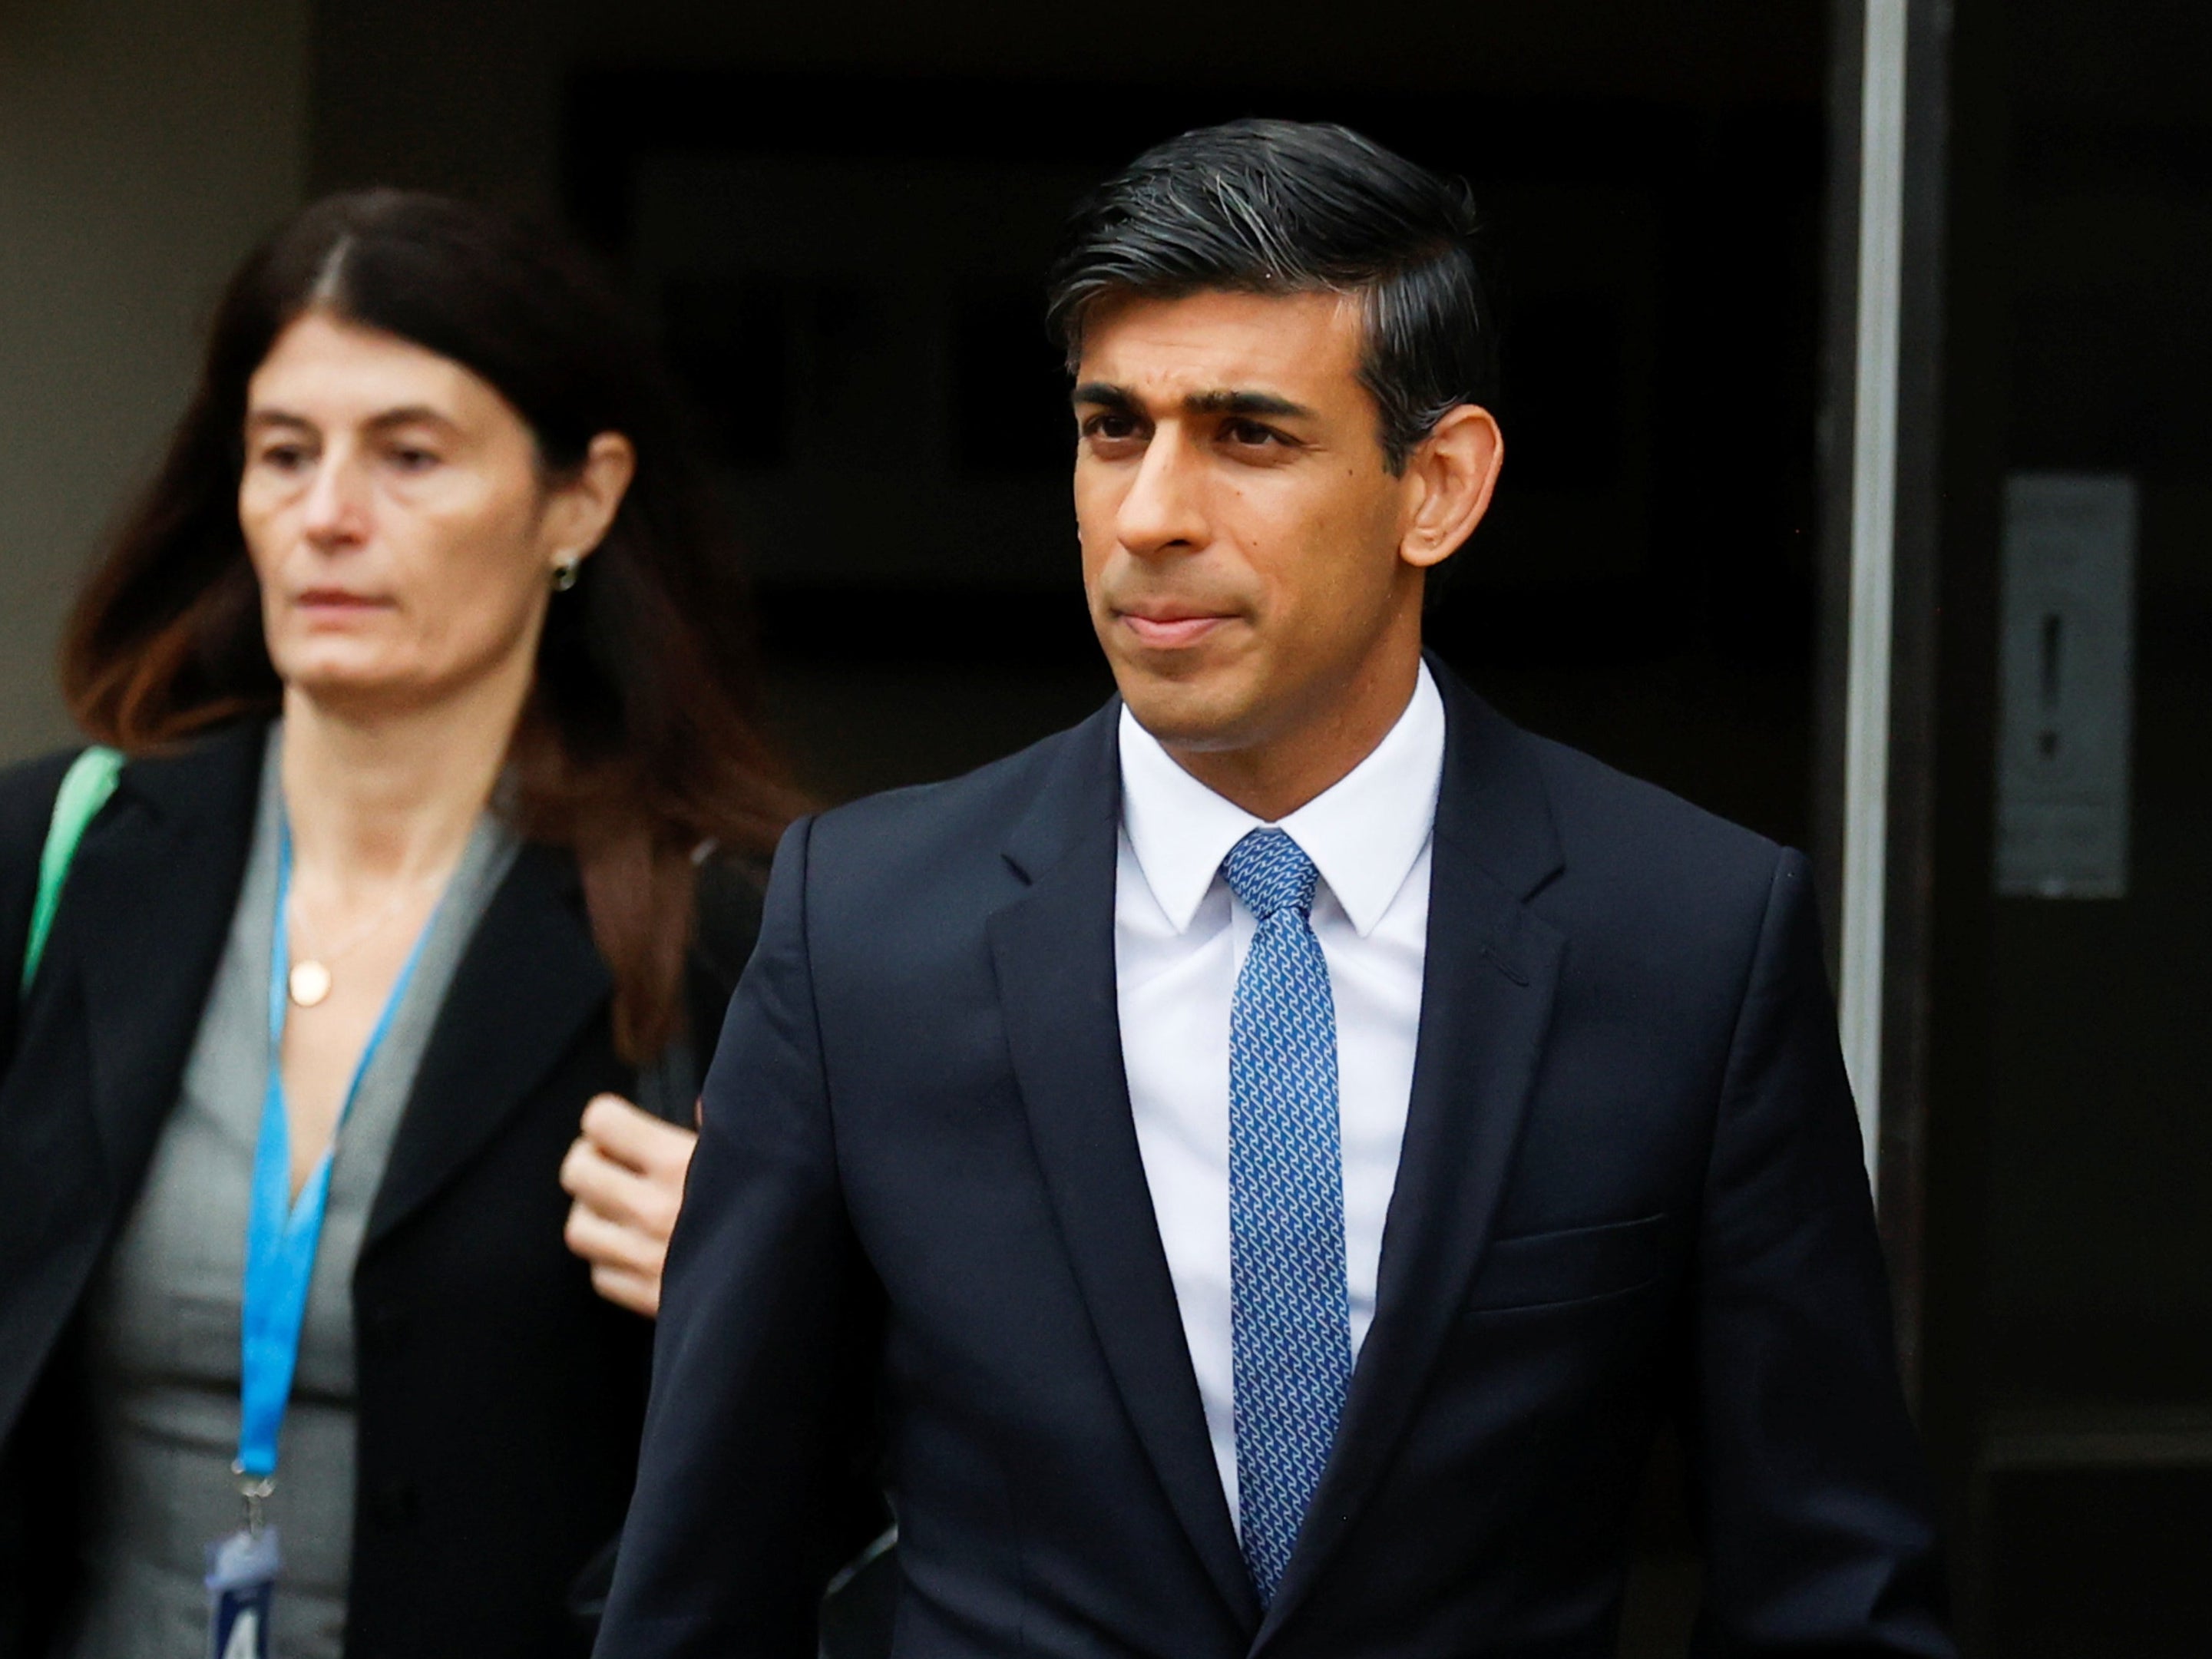 School staff are calling for ‘a long-term viable funding solution’ ahead of chancellor Rishi Sunak’s spending review later this month